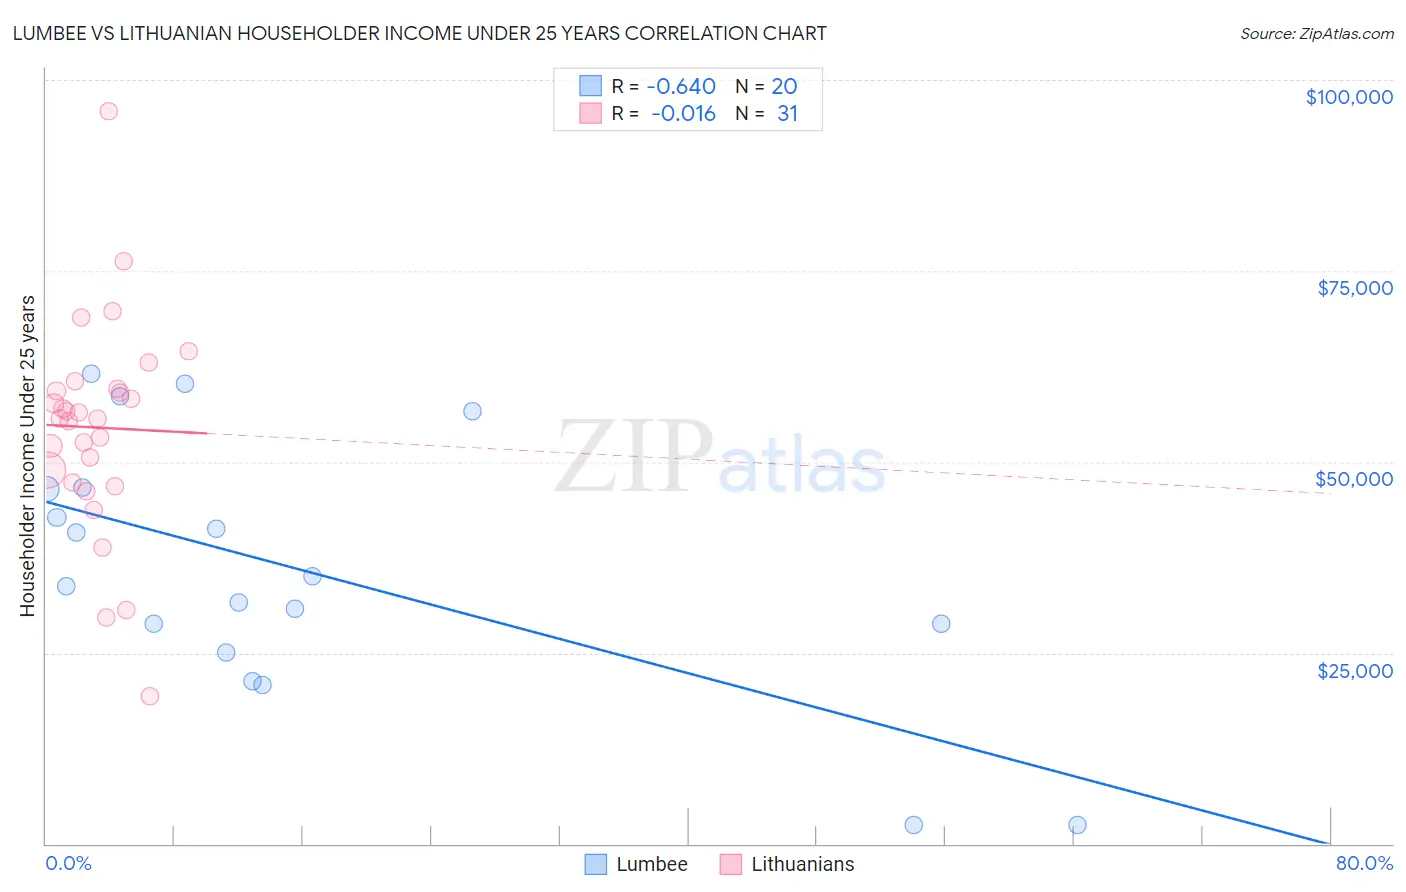 Lumbee vs Lithuanian Householder Income Under 25 years